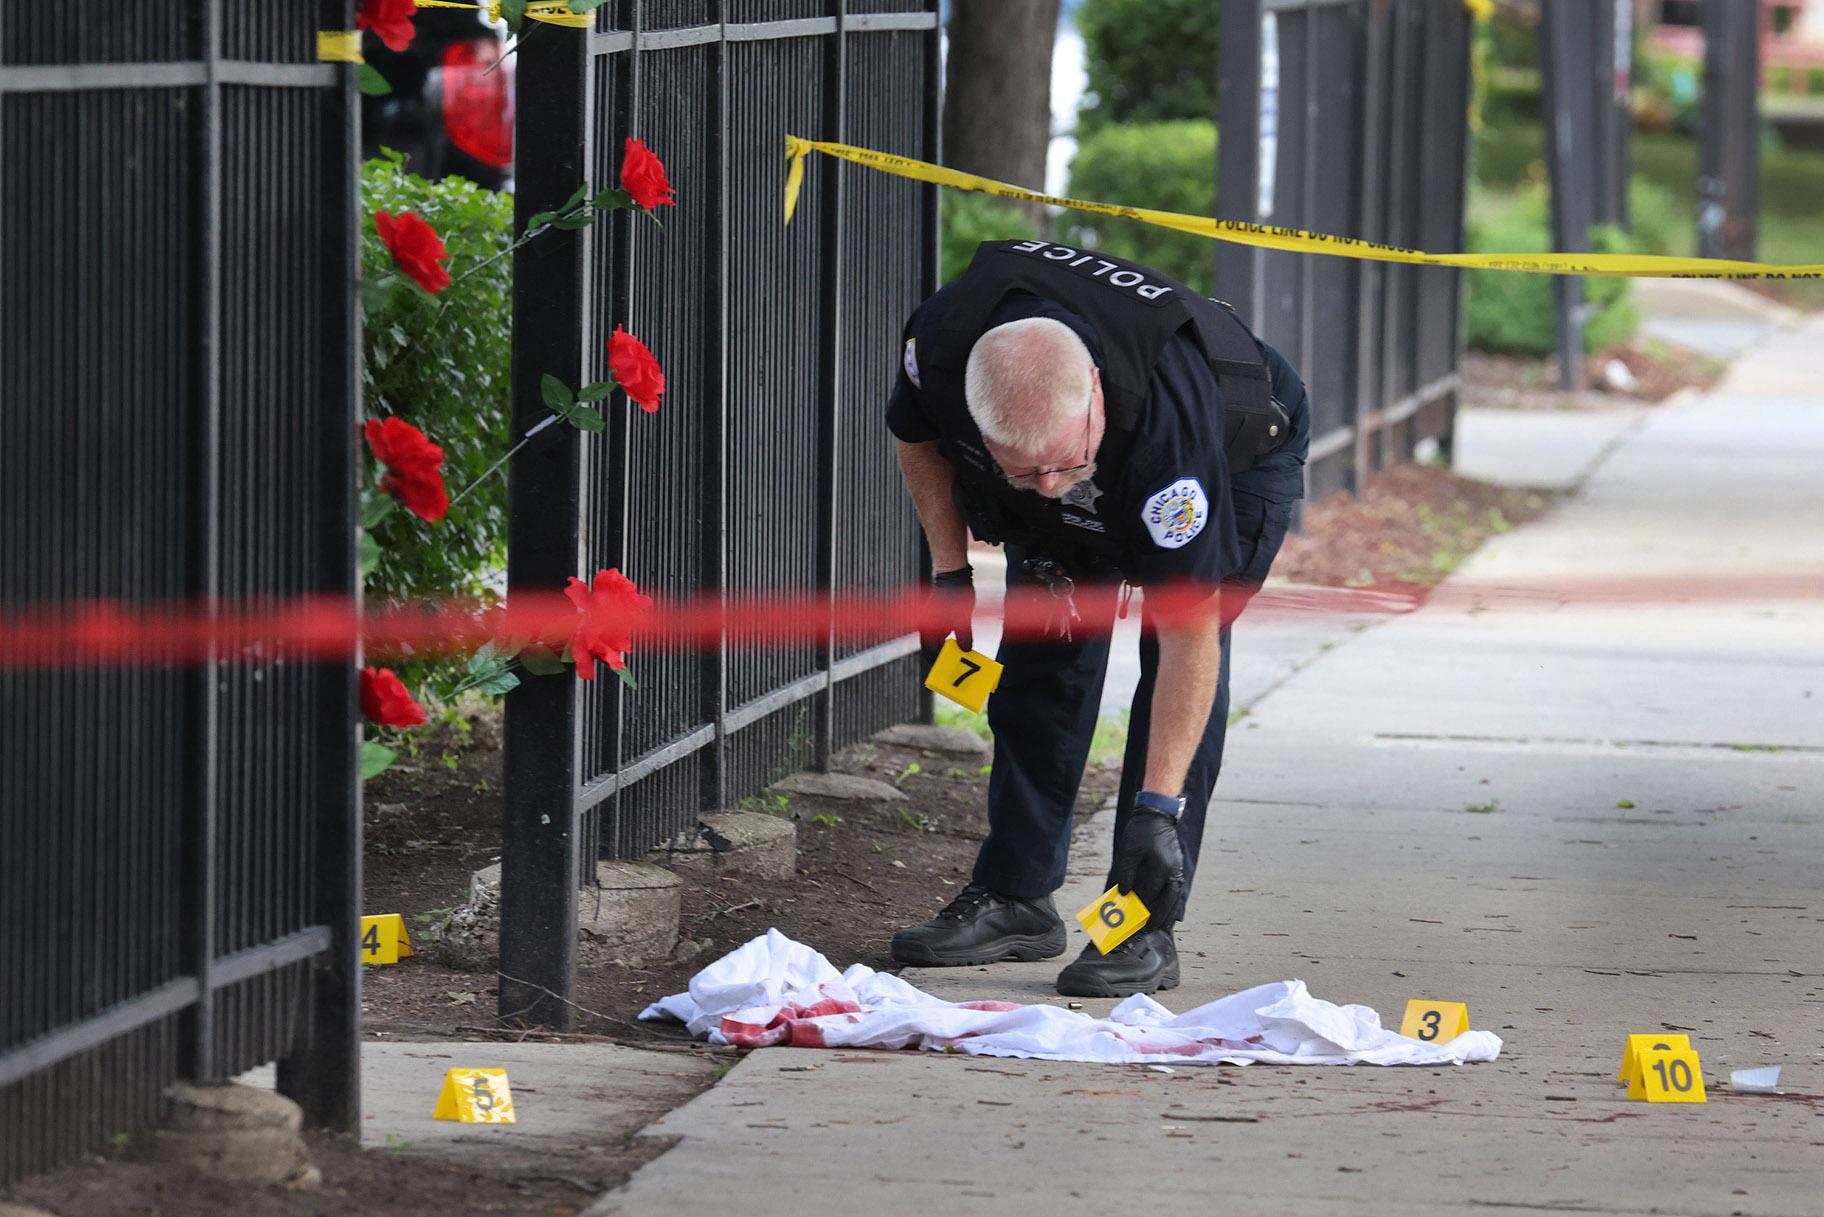 Police investigate a crime scene where three people were shot — one fatally — in the Bridgeport neighborhood on June 23 in Chicago. (Scott Olson / Getty Images)